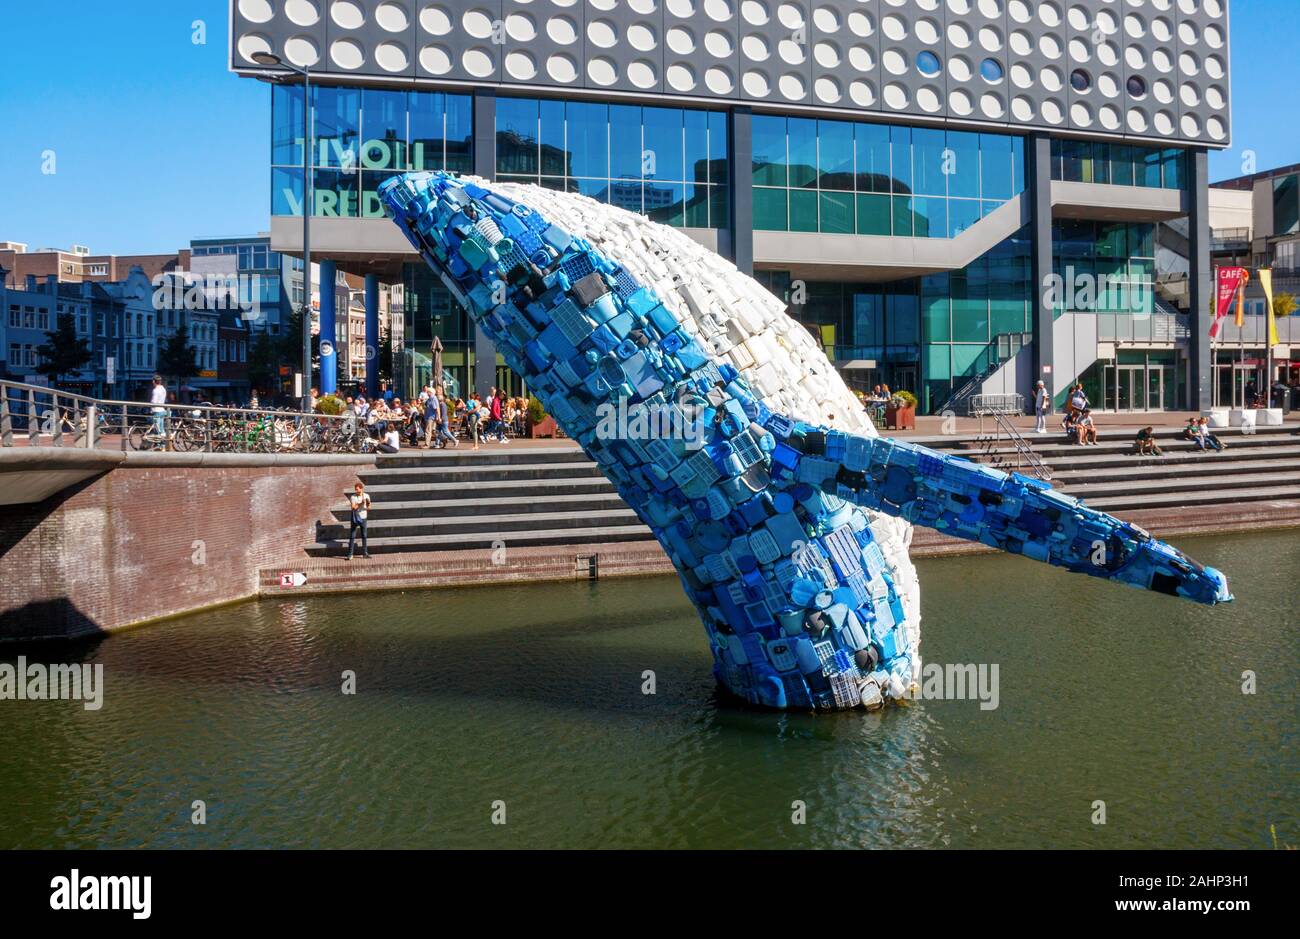 Large whale, called the Skyscraper, made of plastics from the oceans. Utrecht, The Netherlands. Stock Photo